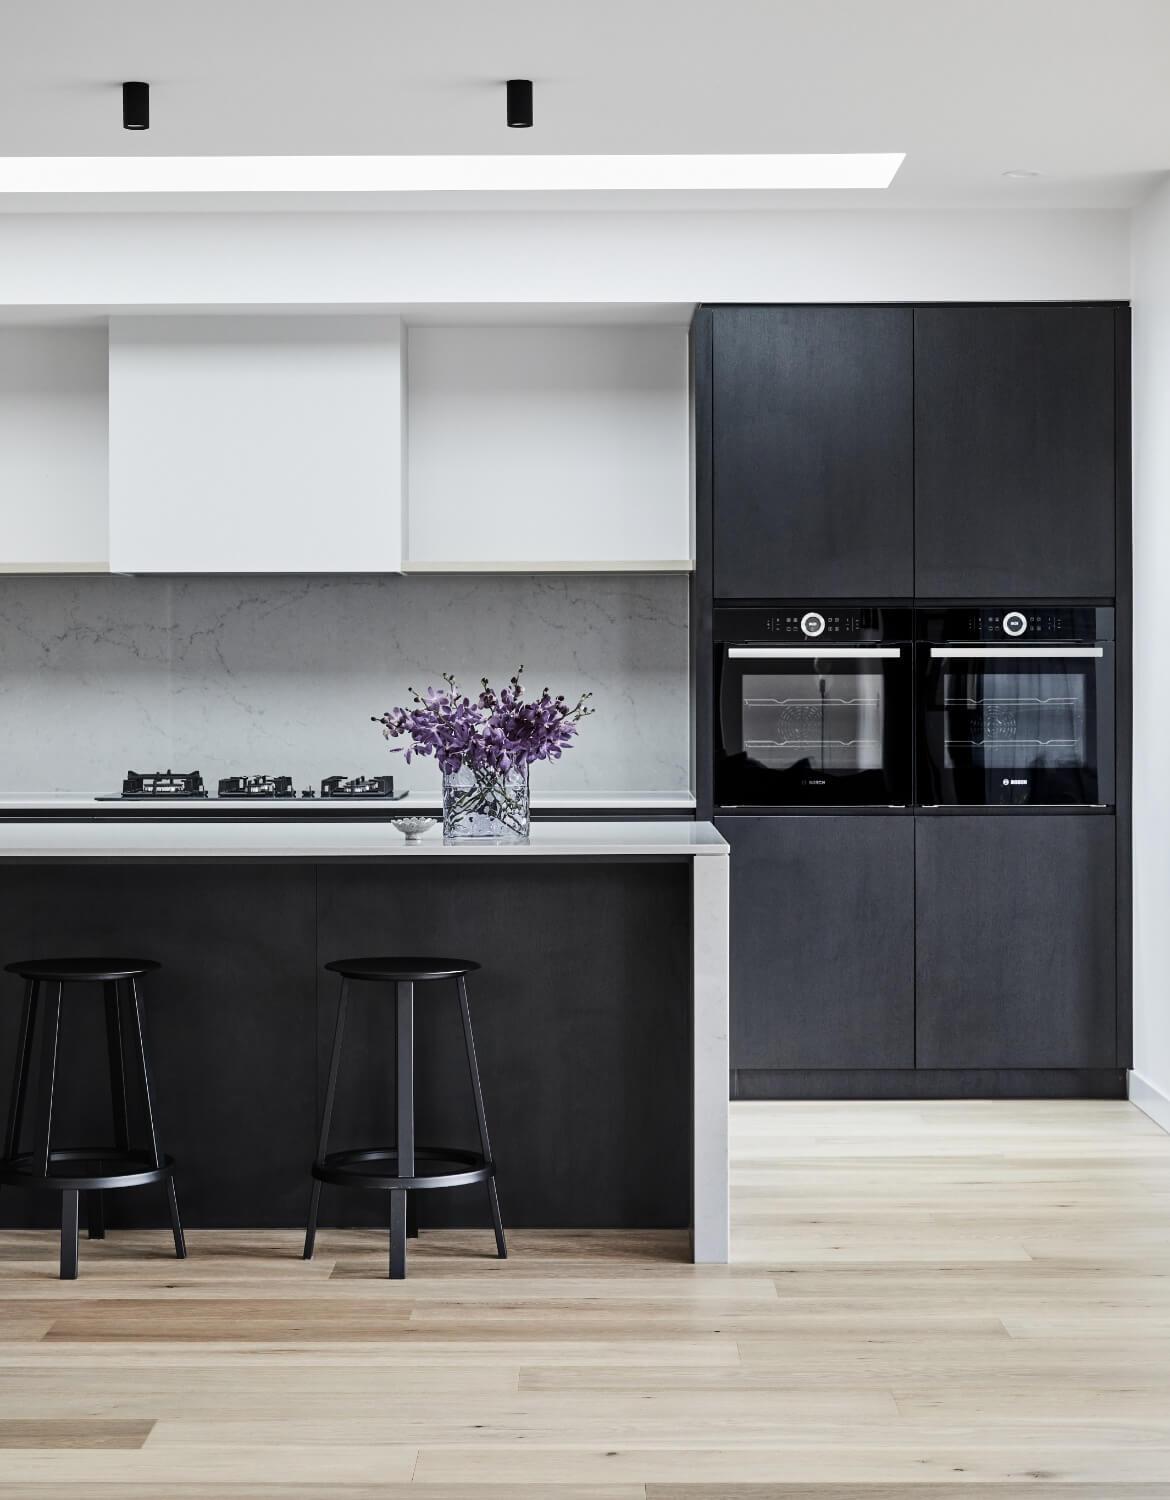 Black Integrated Appliances And Stools Compliment Kitchen Palette